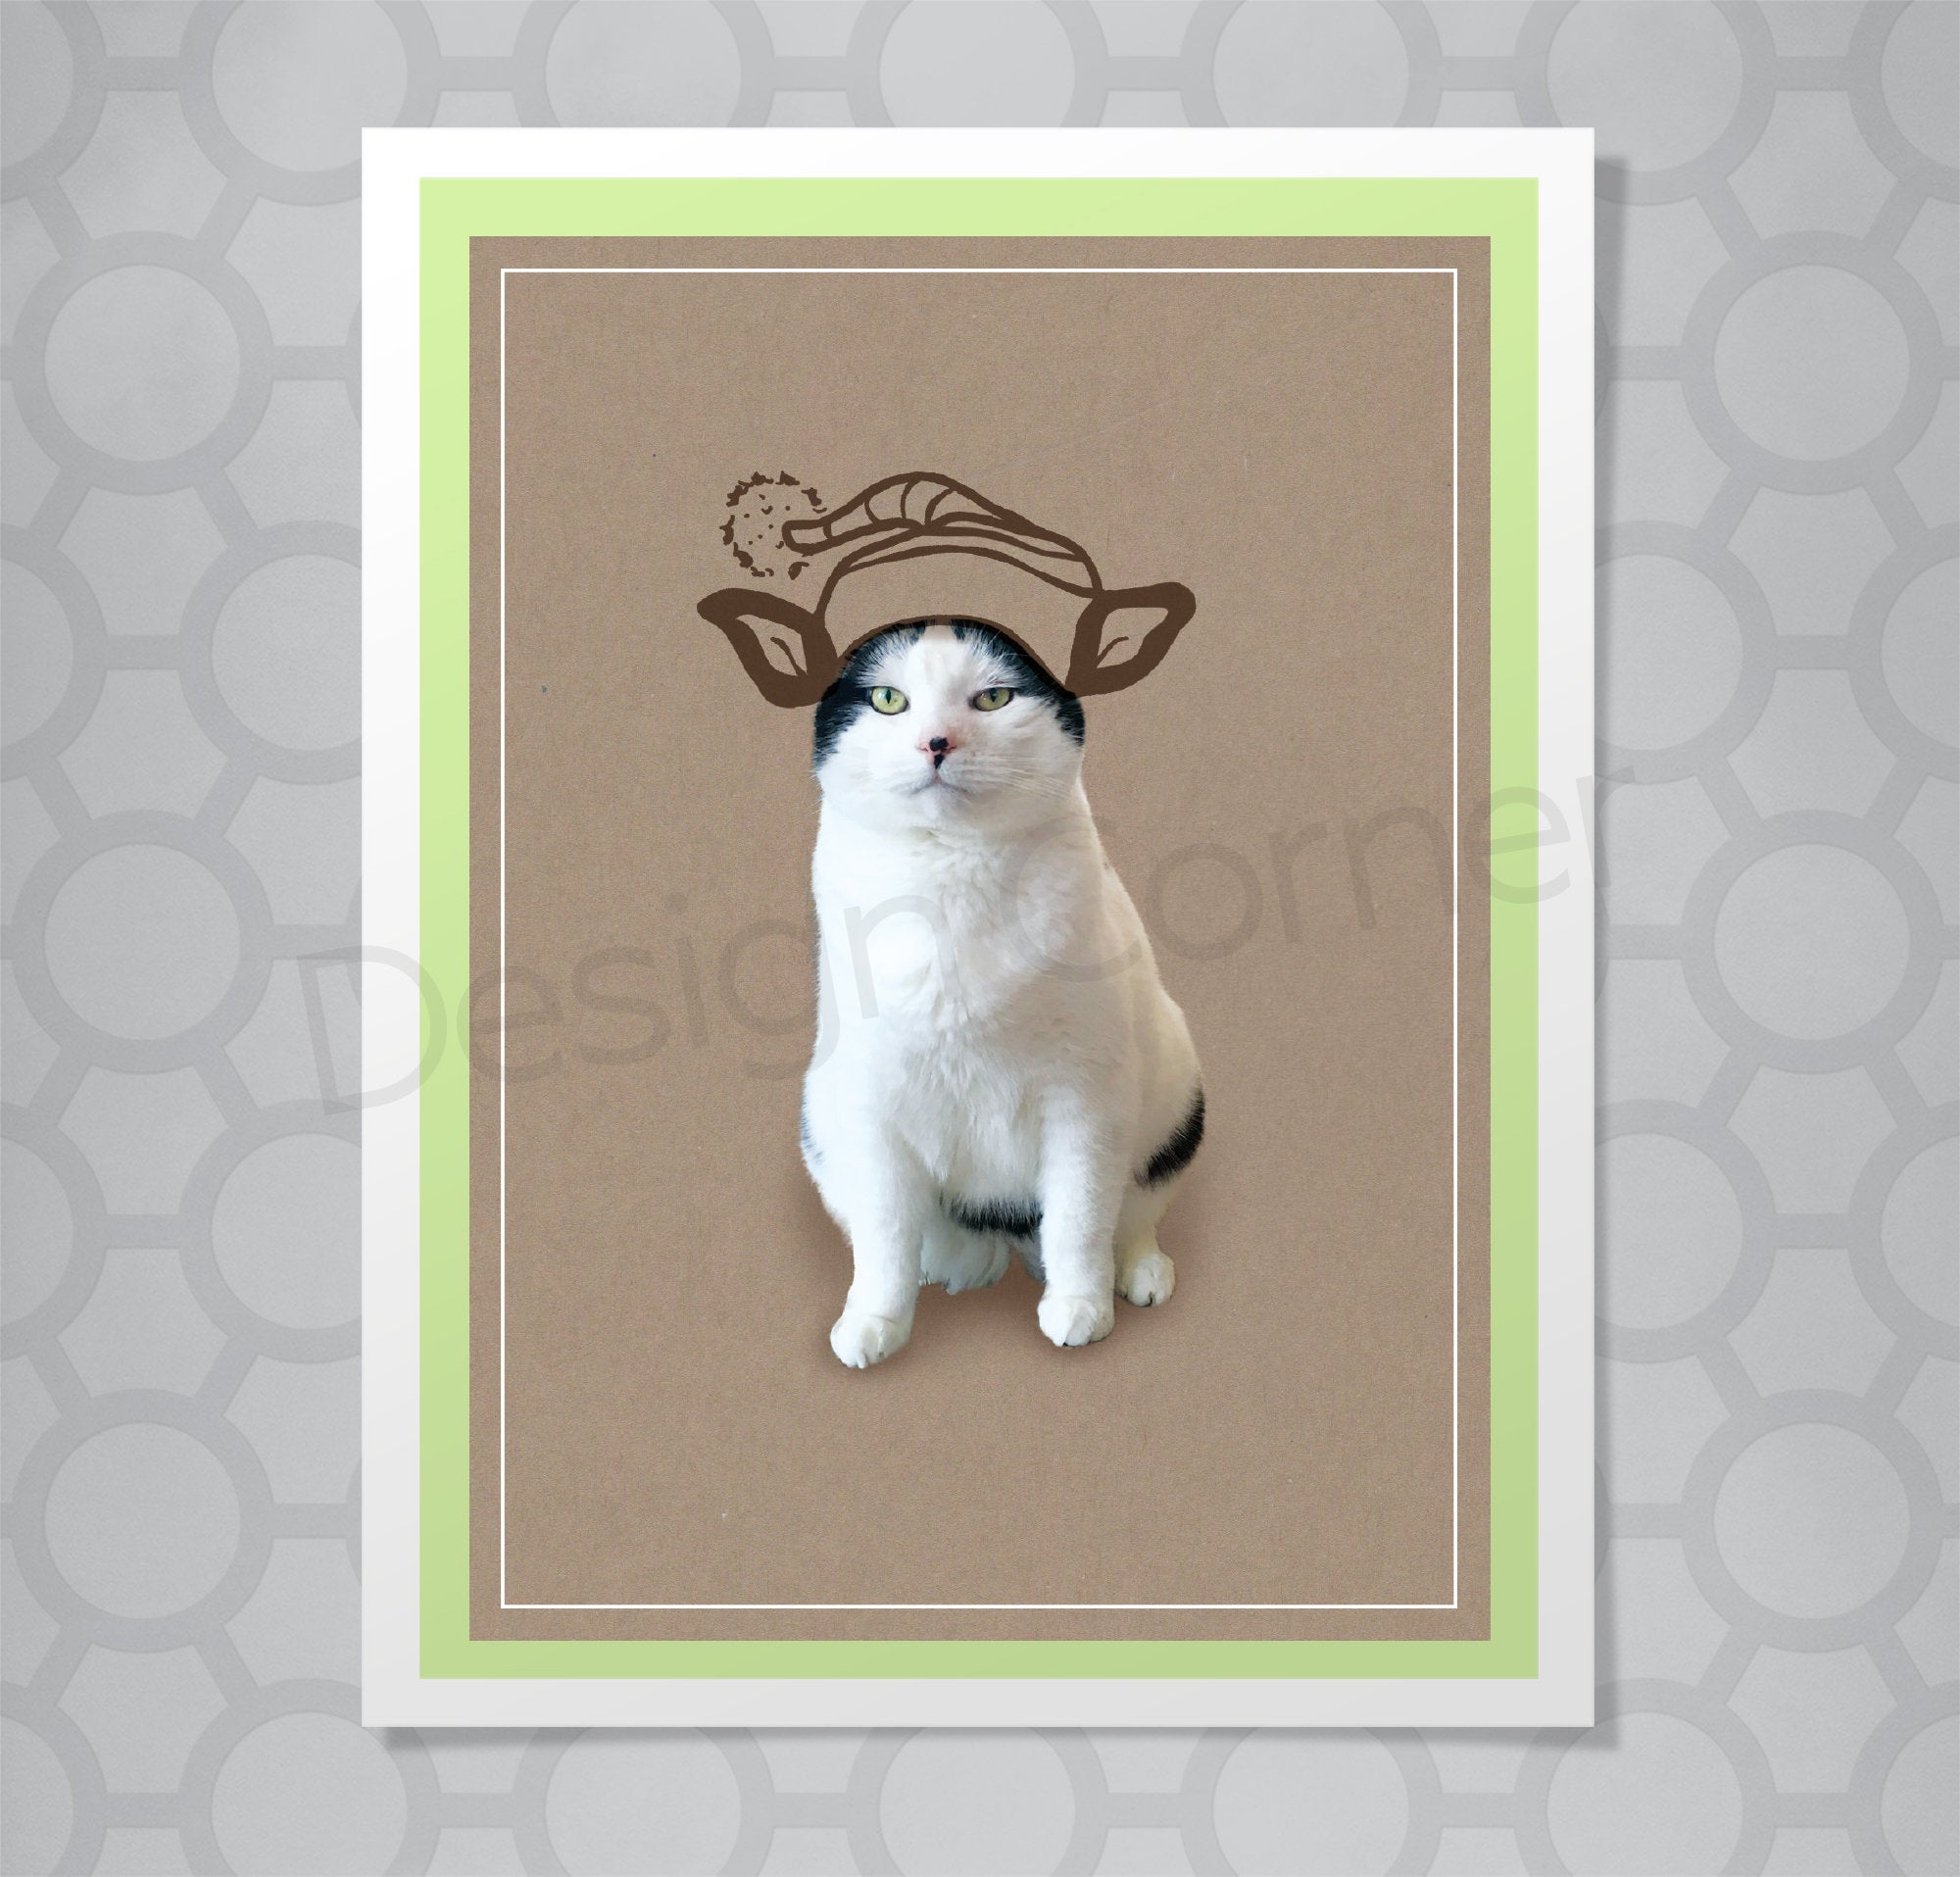 Photo of Max the Cat with illustrated elf hat on his head on kraft brown paper background.